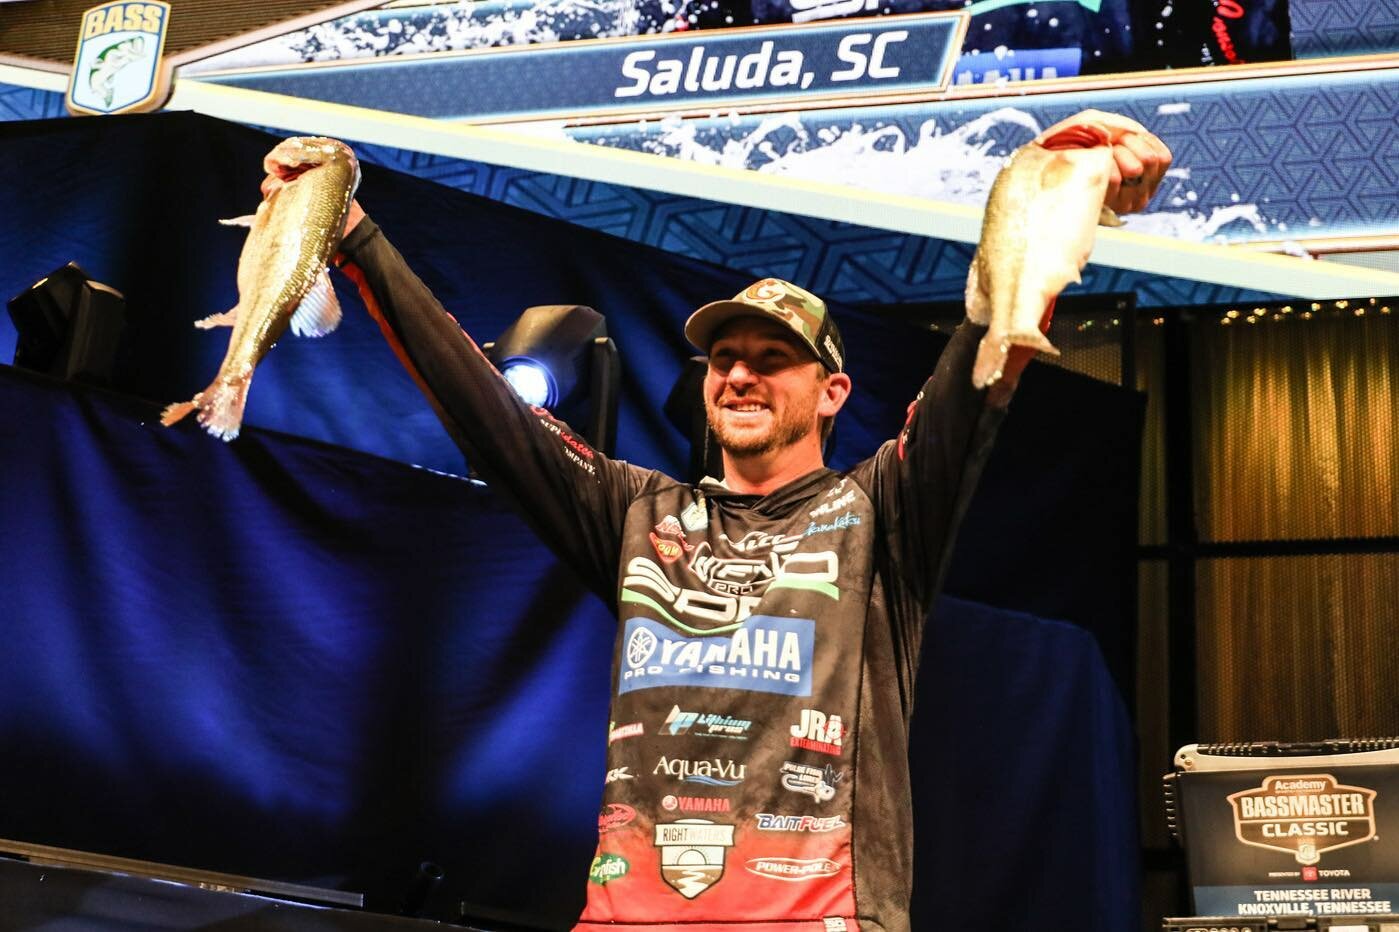 Bassmaster Elite Series stops at Lake Murray with local angler competing